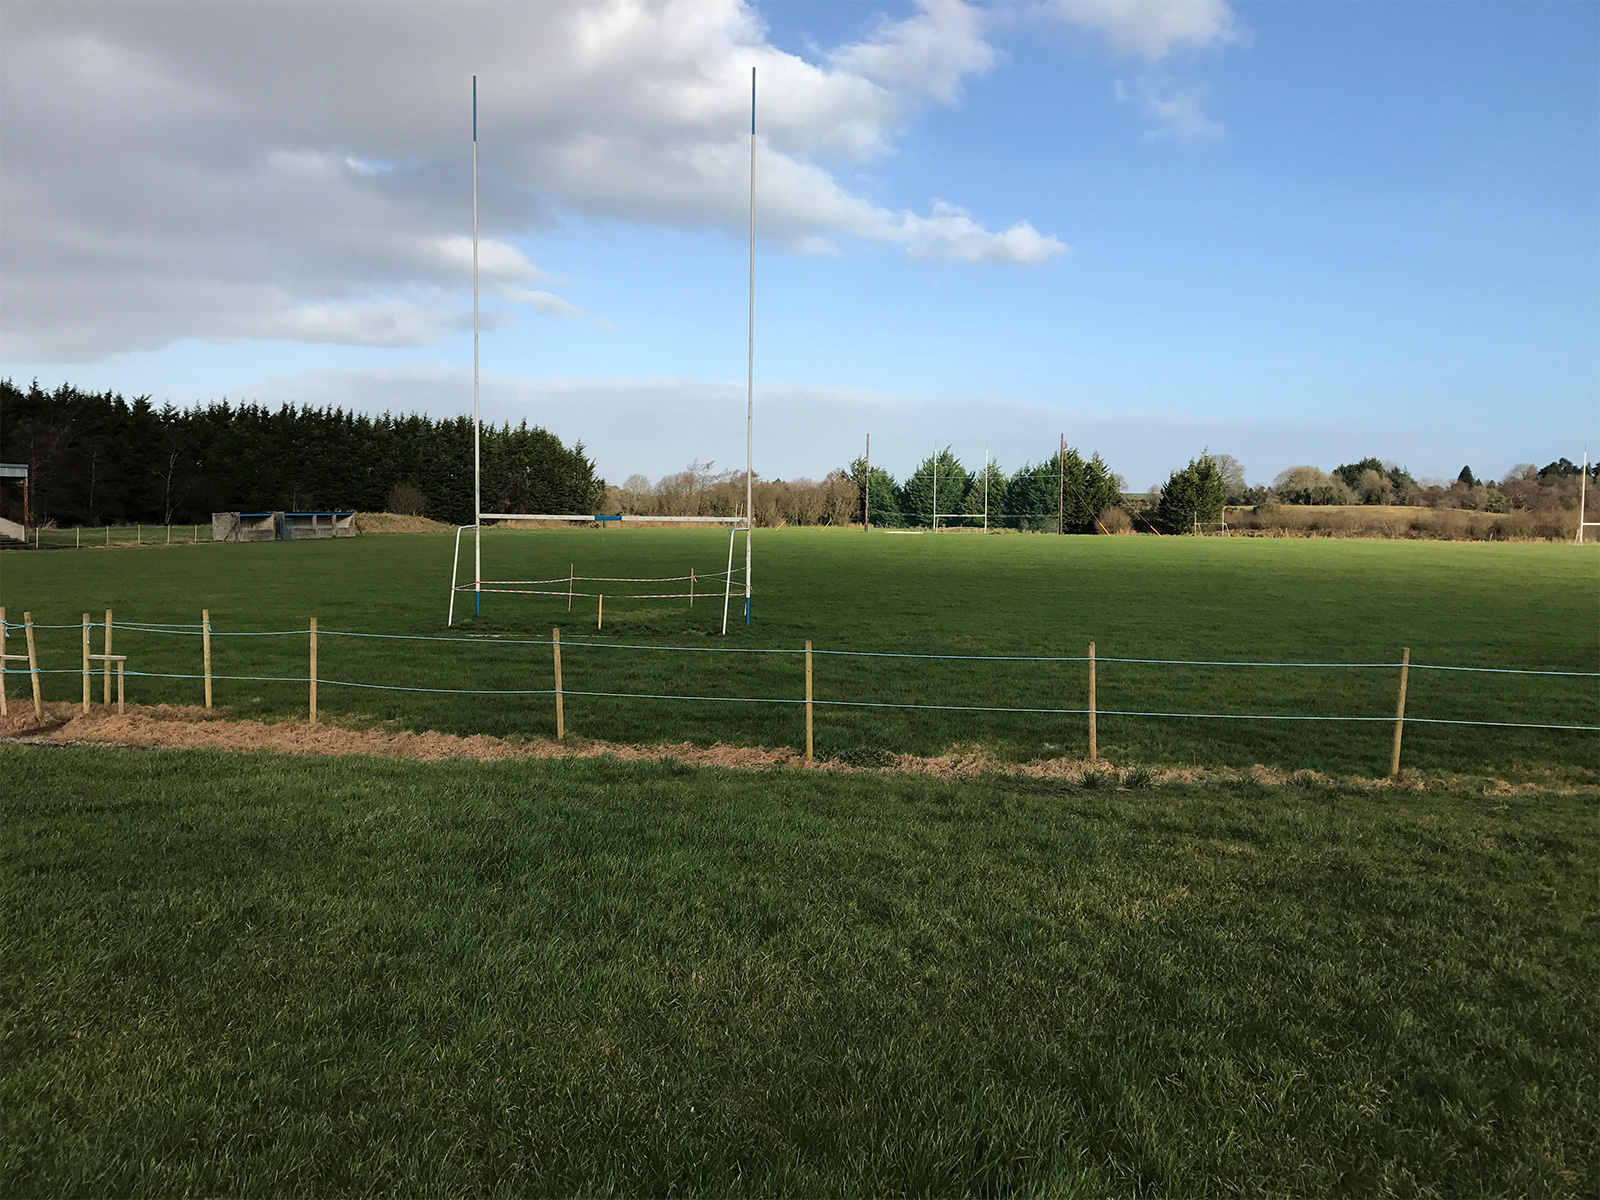 Kiltimagh GAA Club – the re-development of the grounds